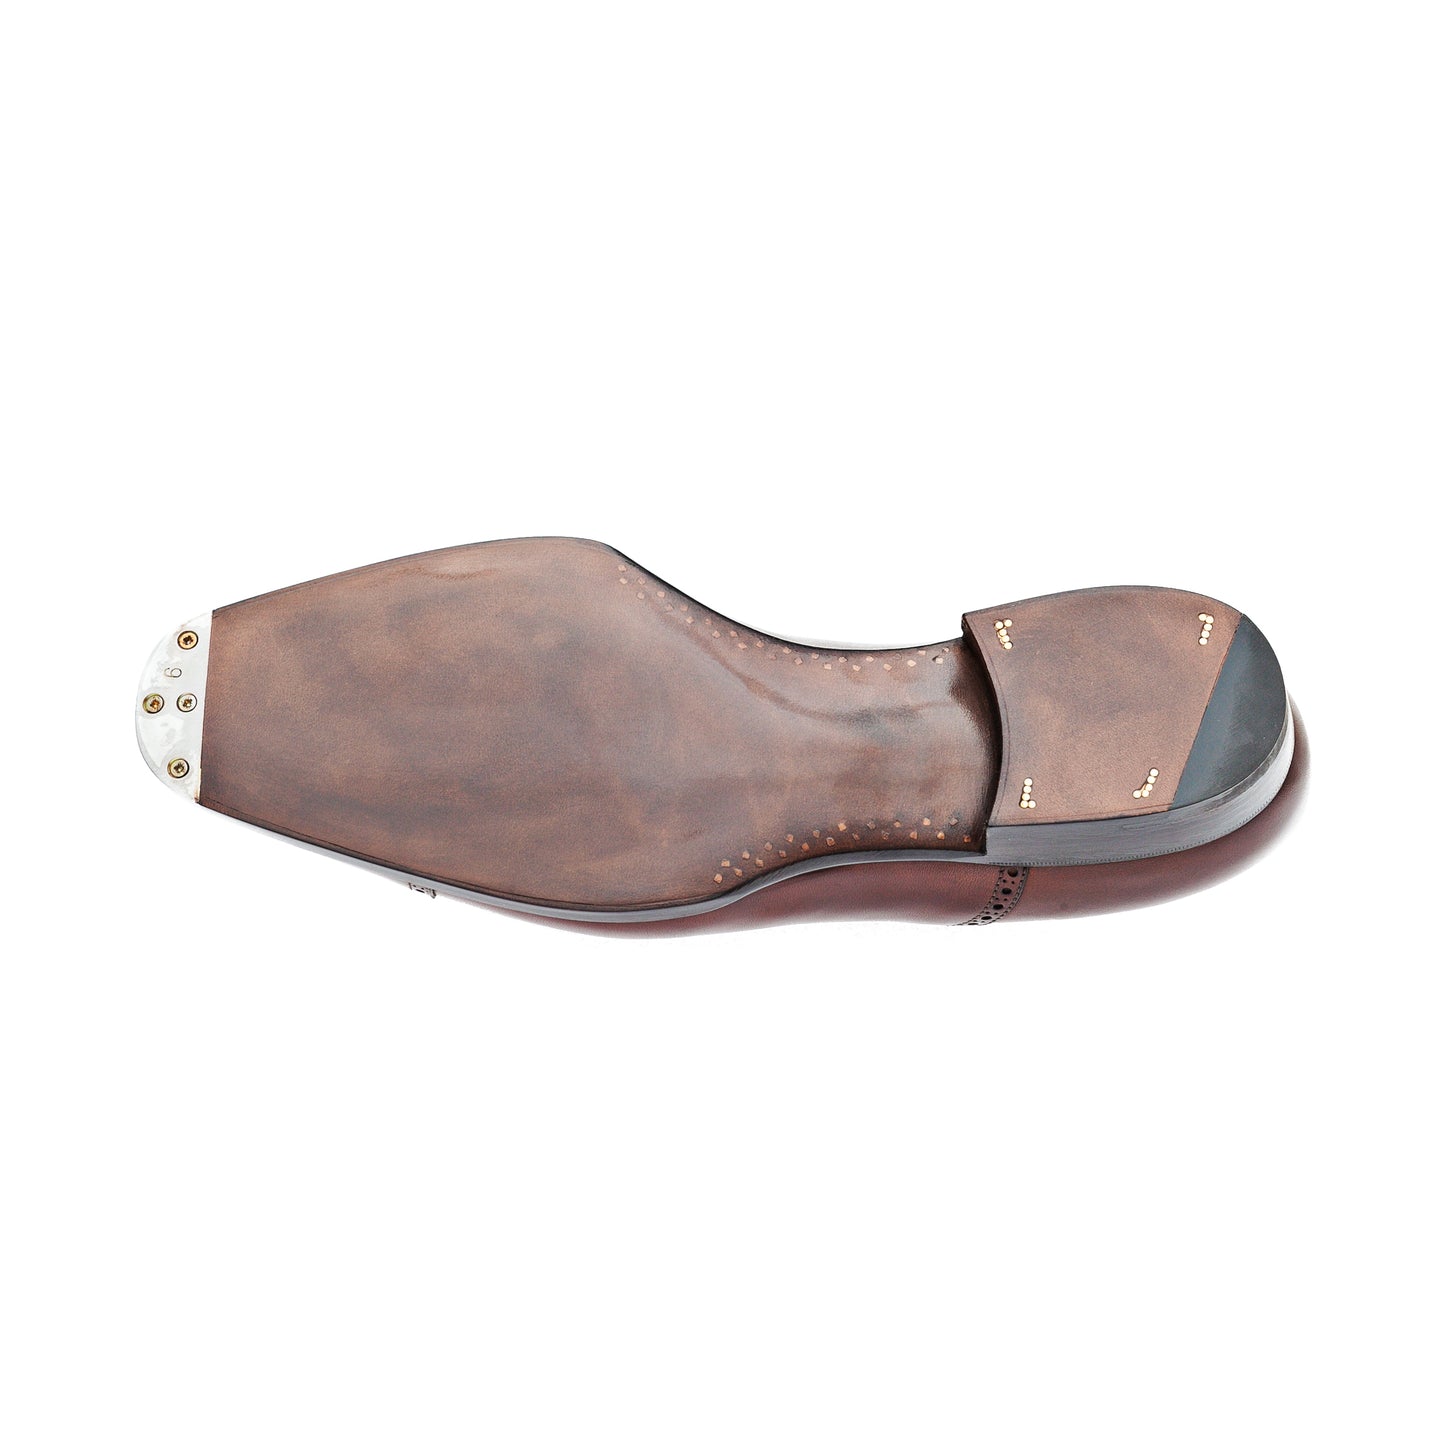 Straight toe cap Oxford, mid brown Crust calf leather, metal tips included